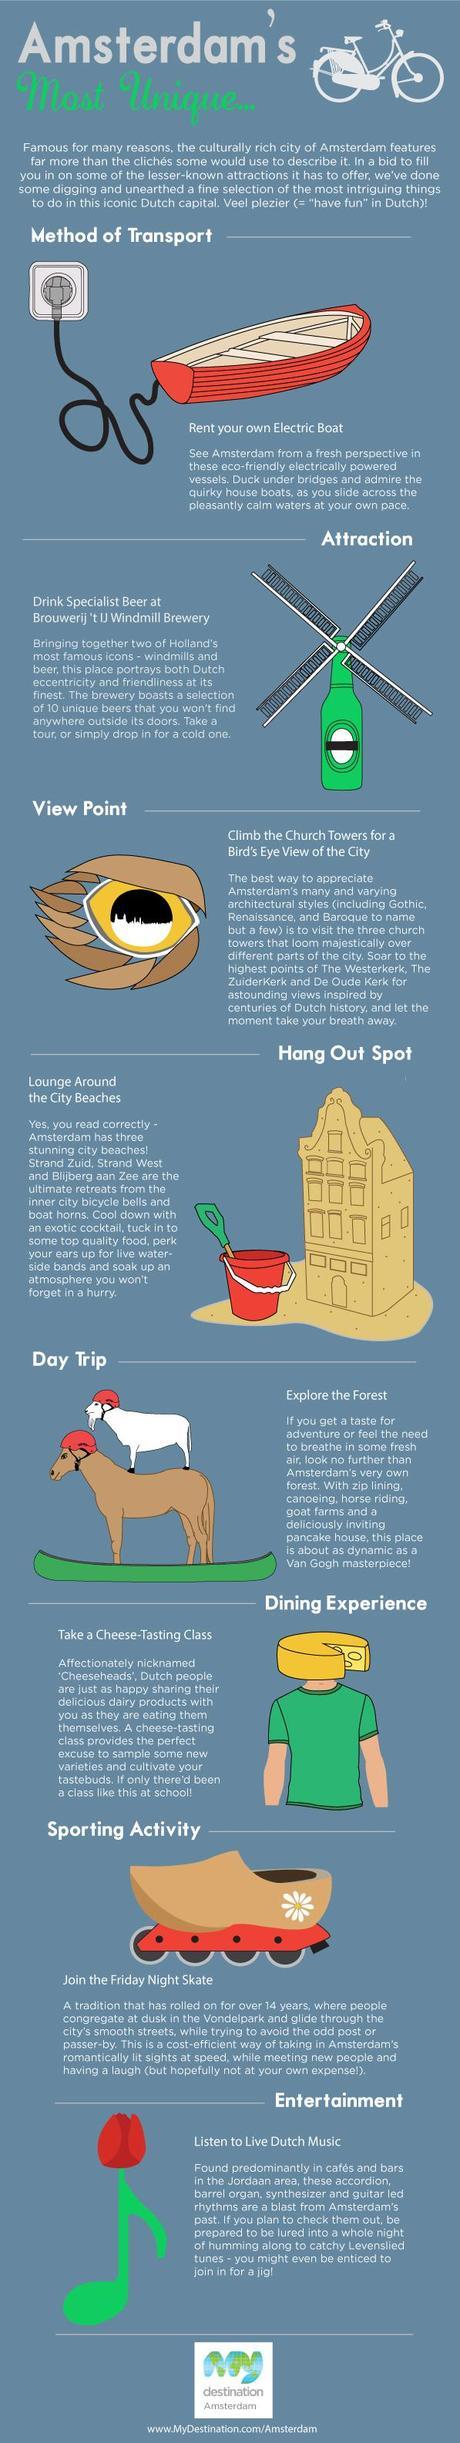 Infographic on Unique Attractions in Amsterdam